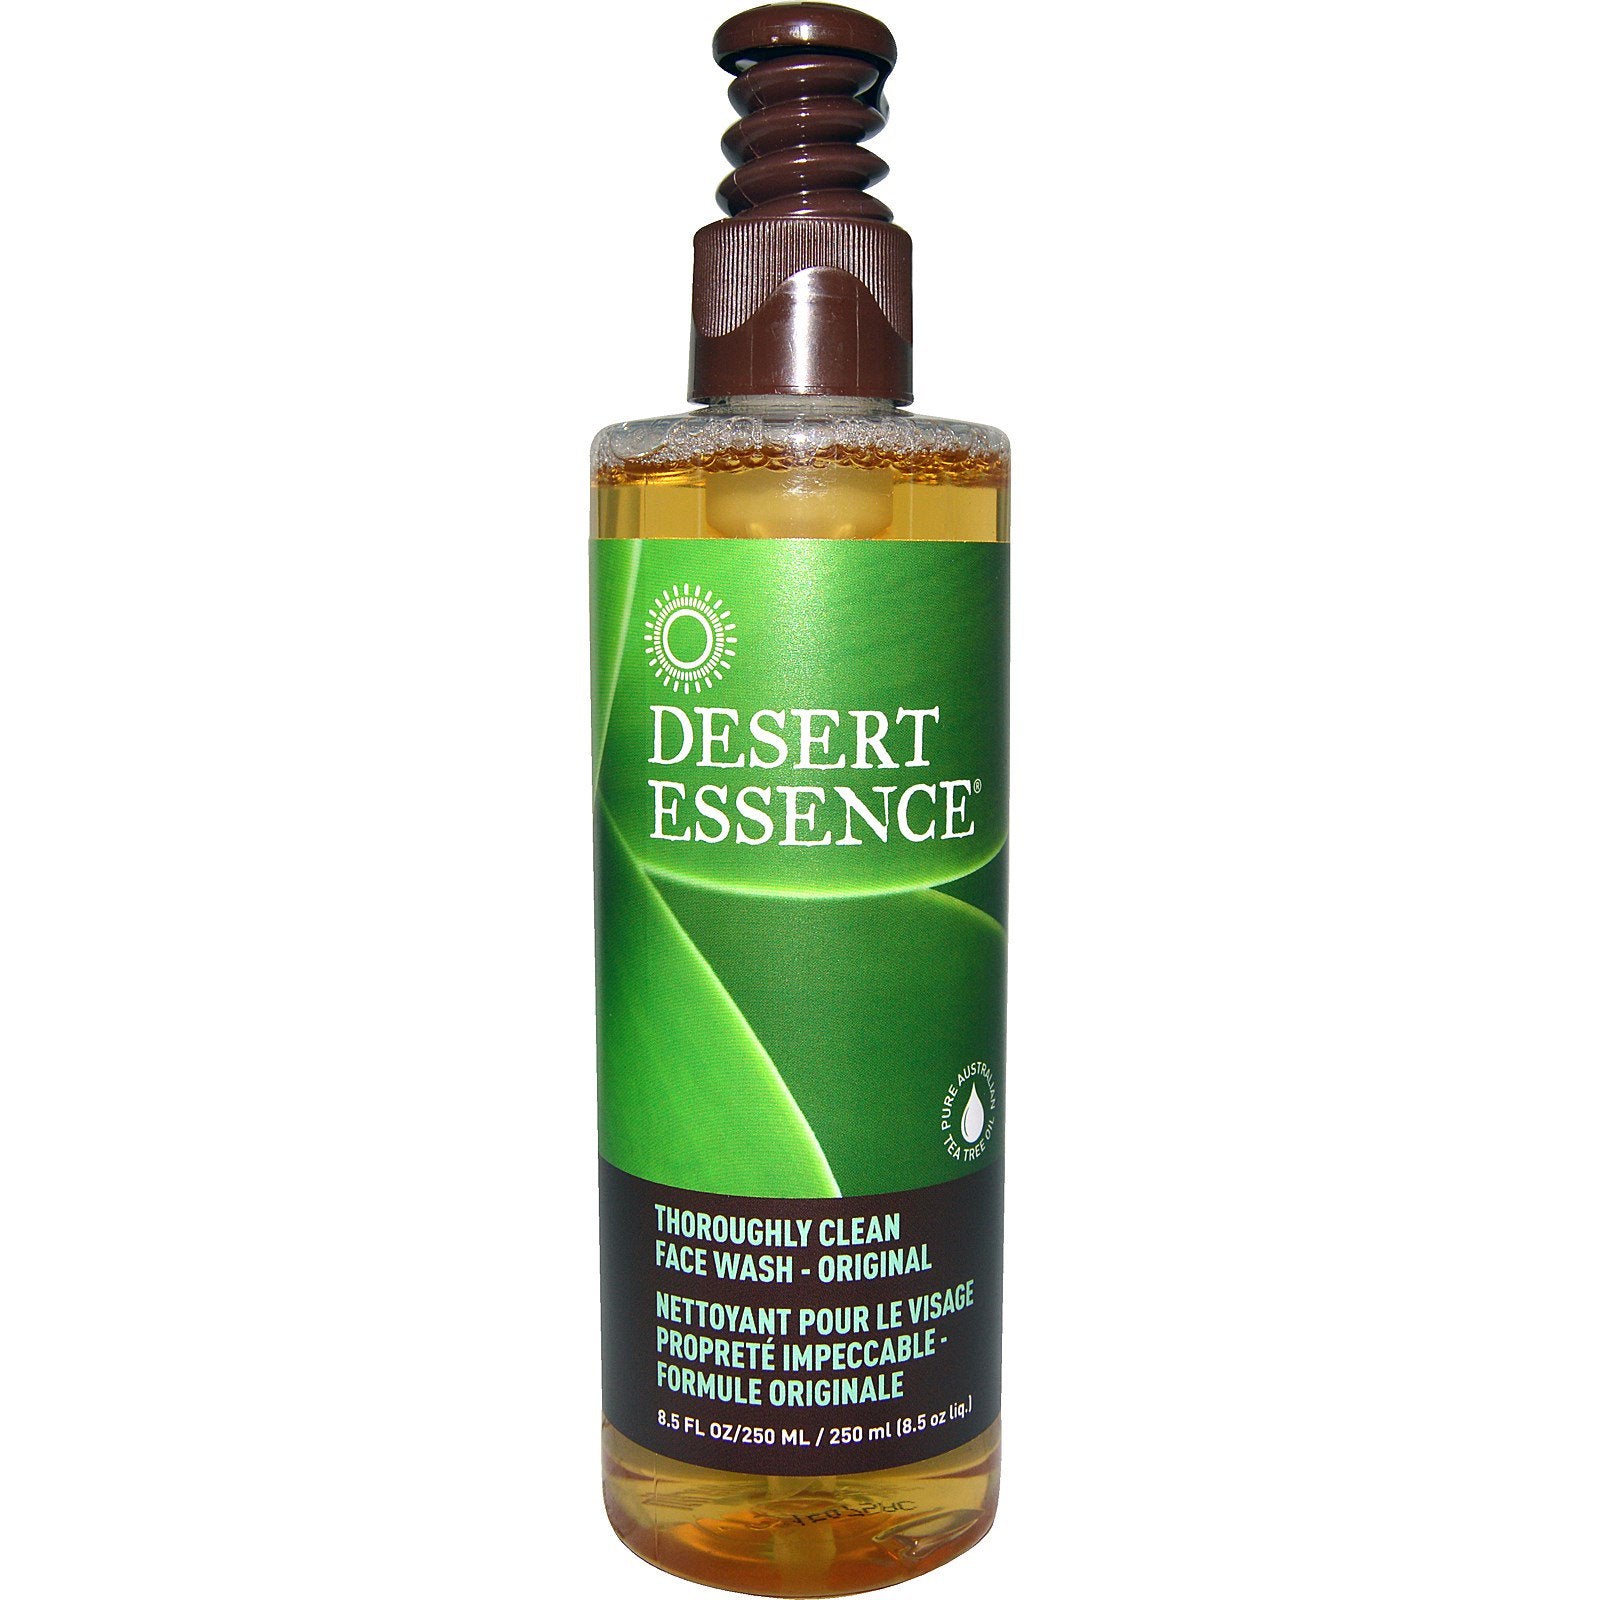 Desert Essence Thoroughly Clean Face Wash 236ml